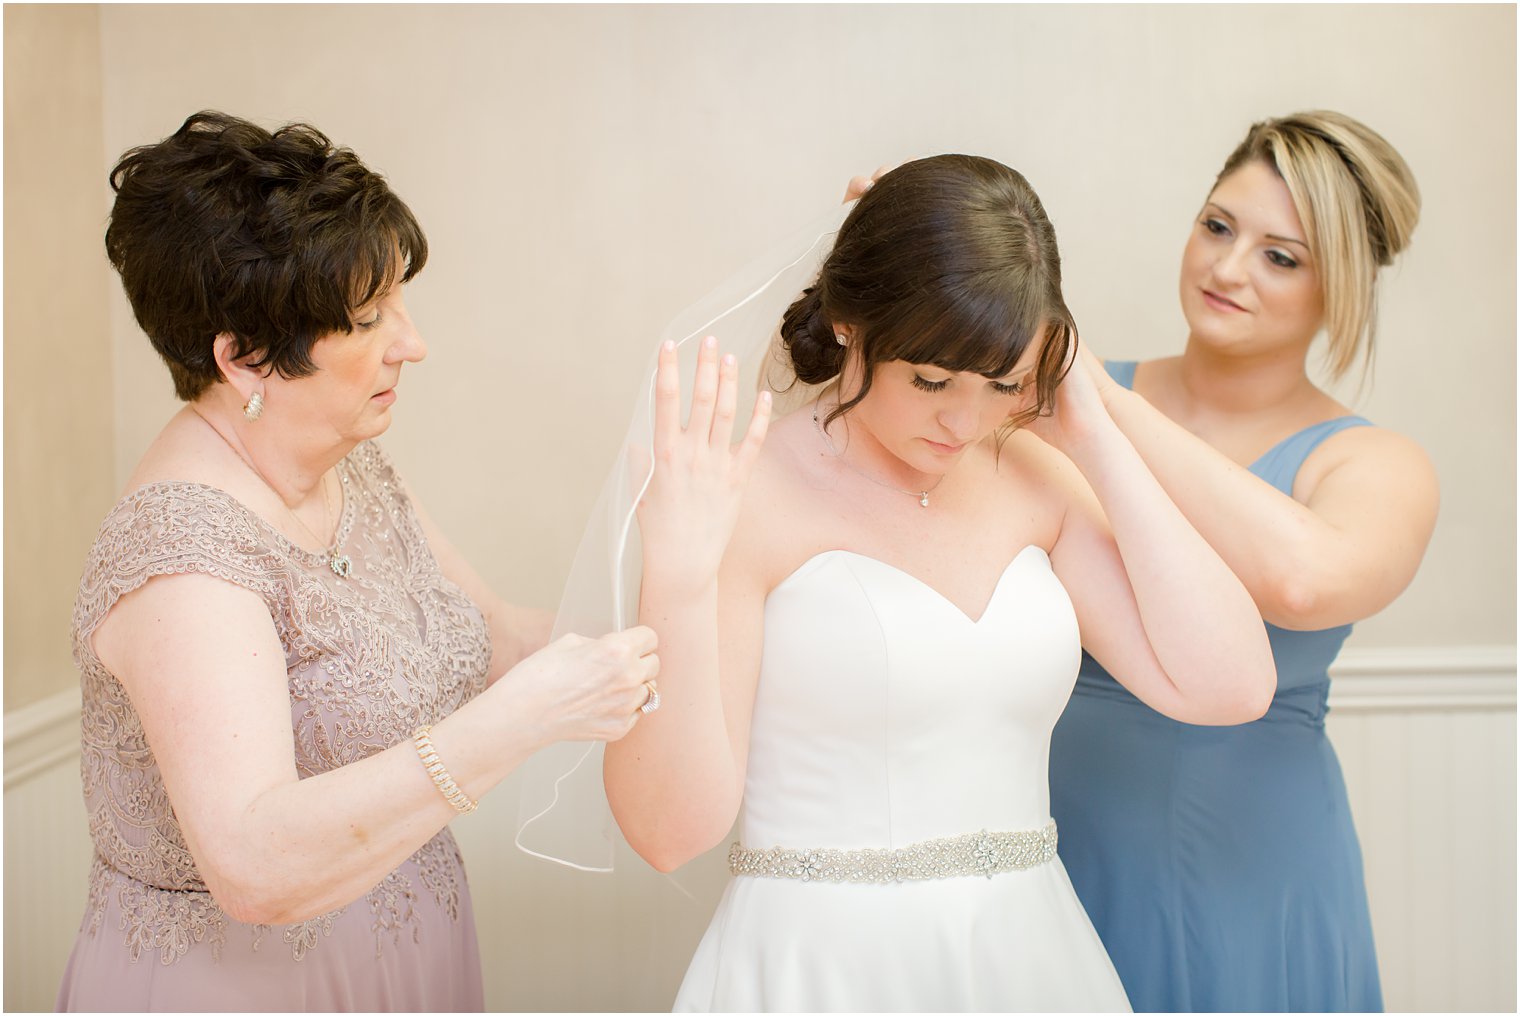 Bride getting ready with her mother and maid of honor